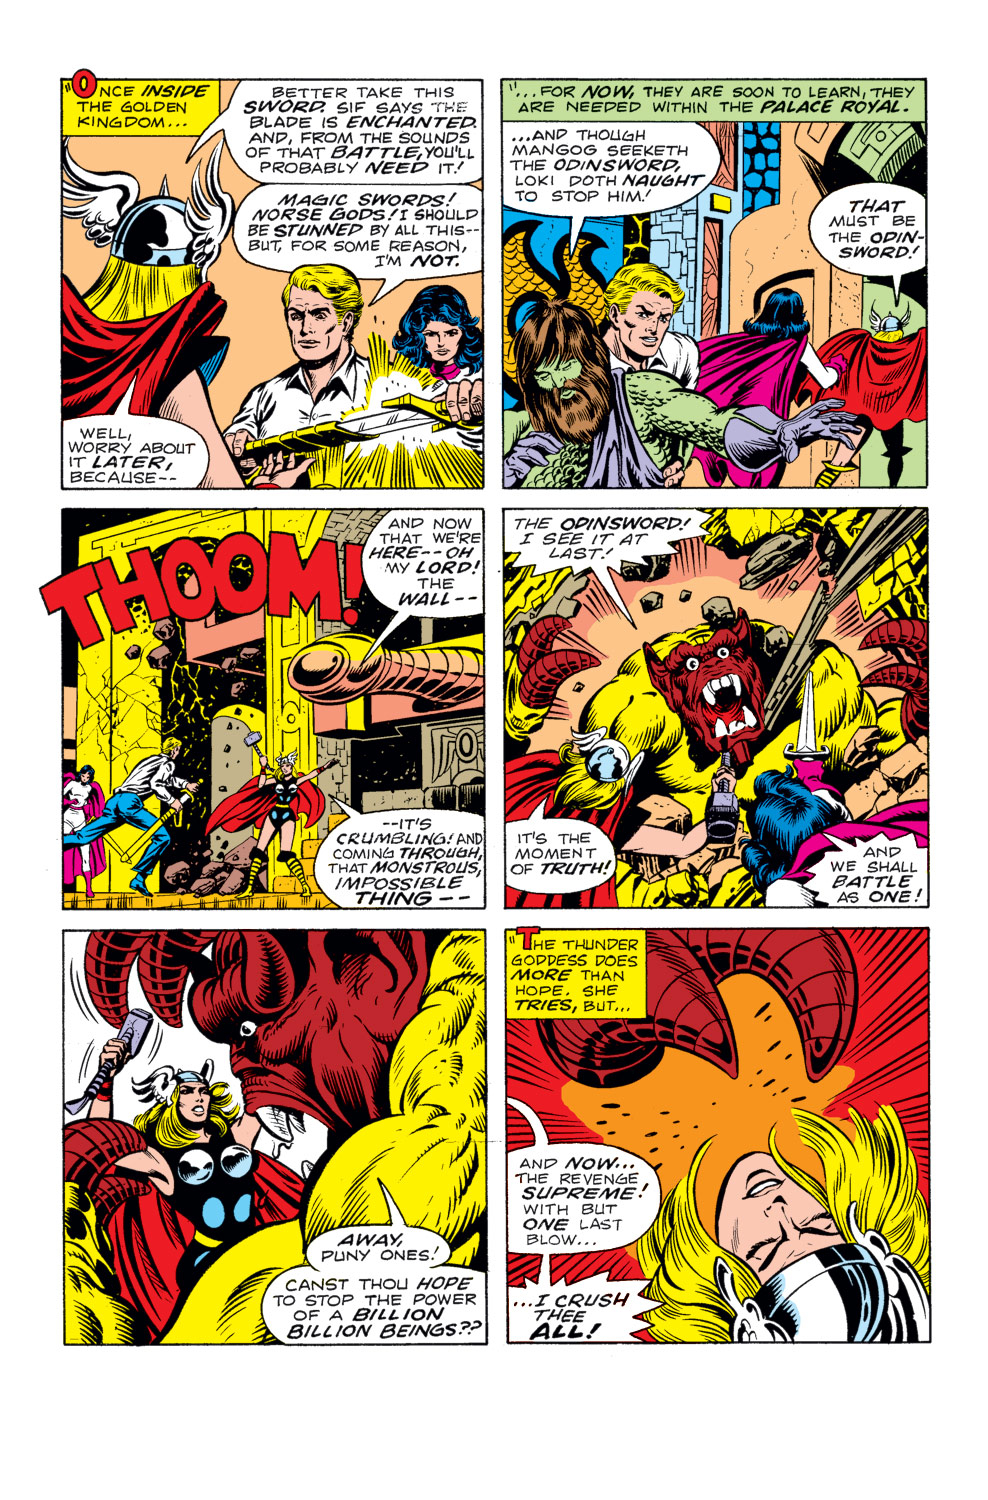 What If? (1977) issue 10 - Jane Foster had found the hammer of Thor - Page 30